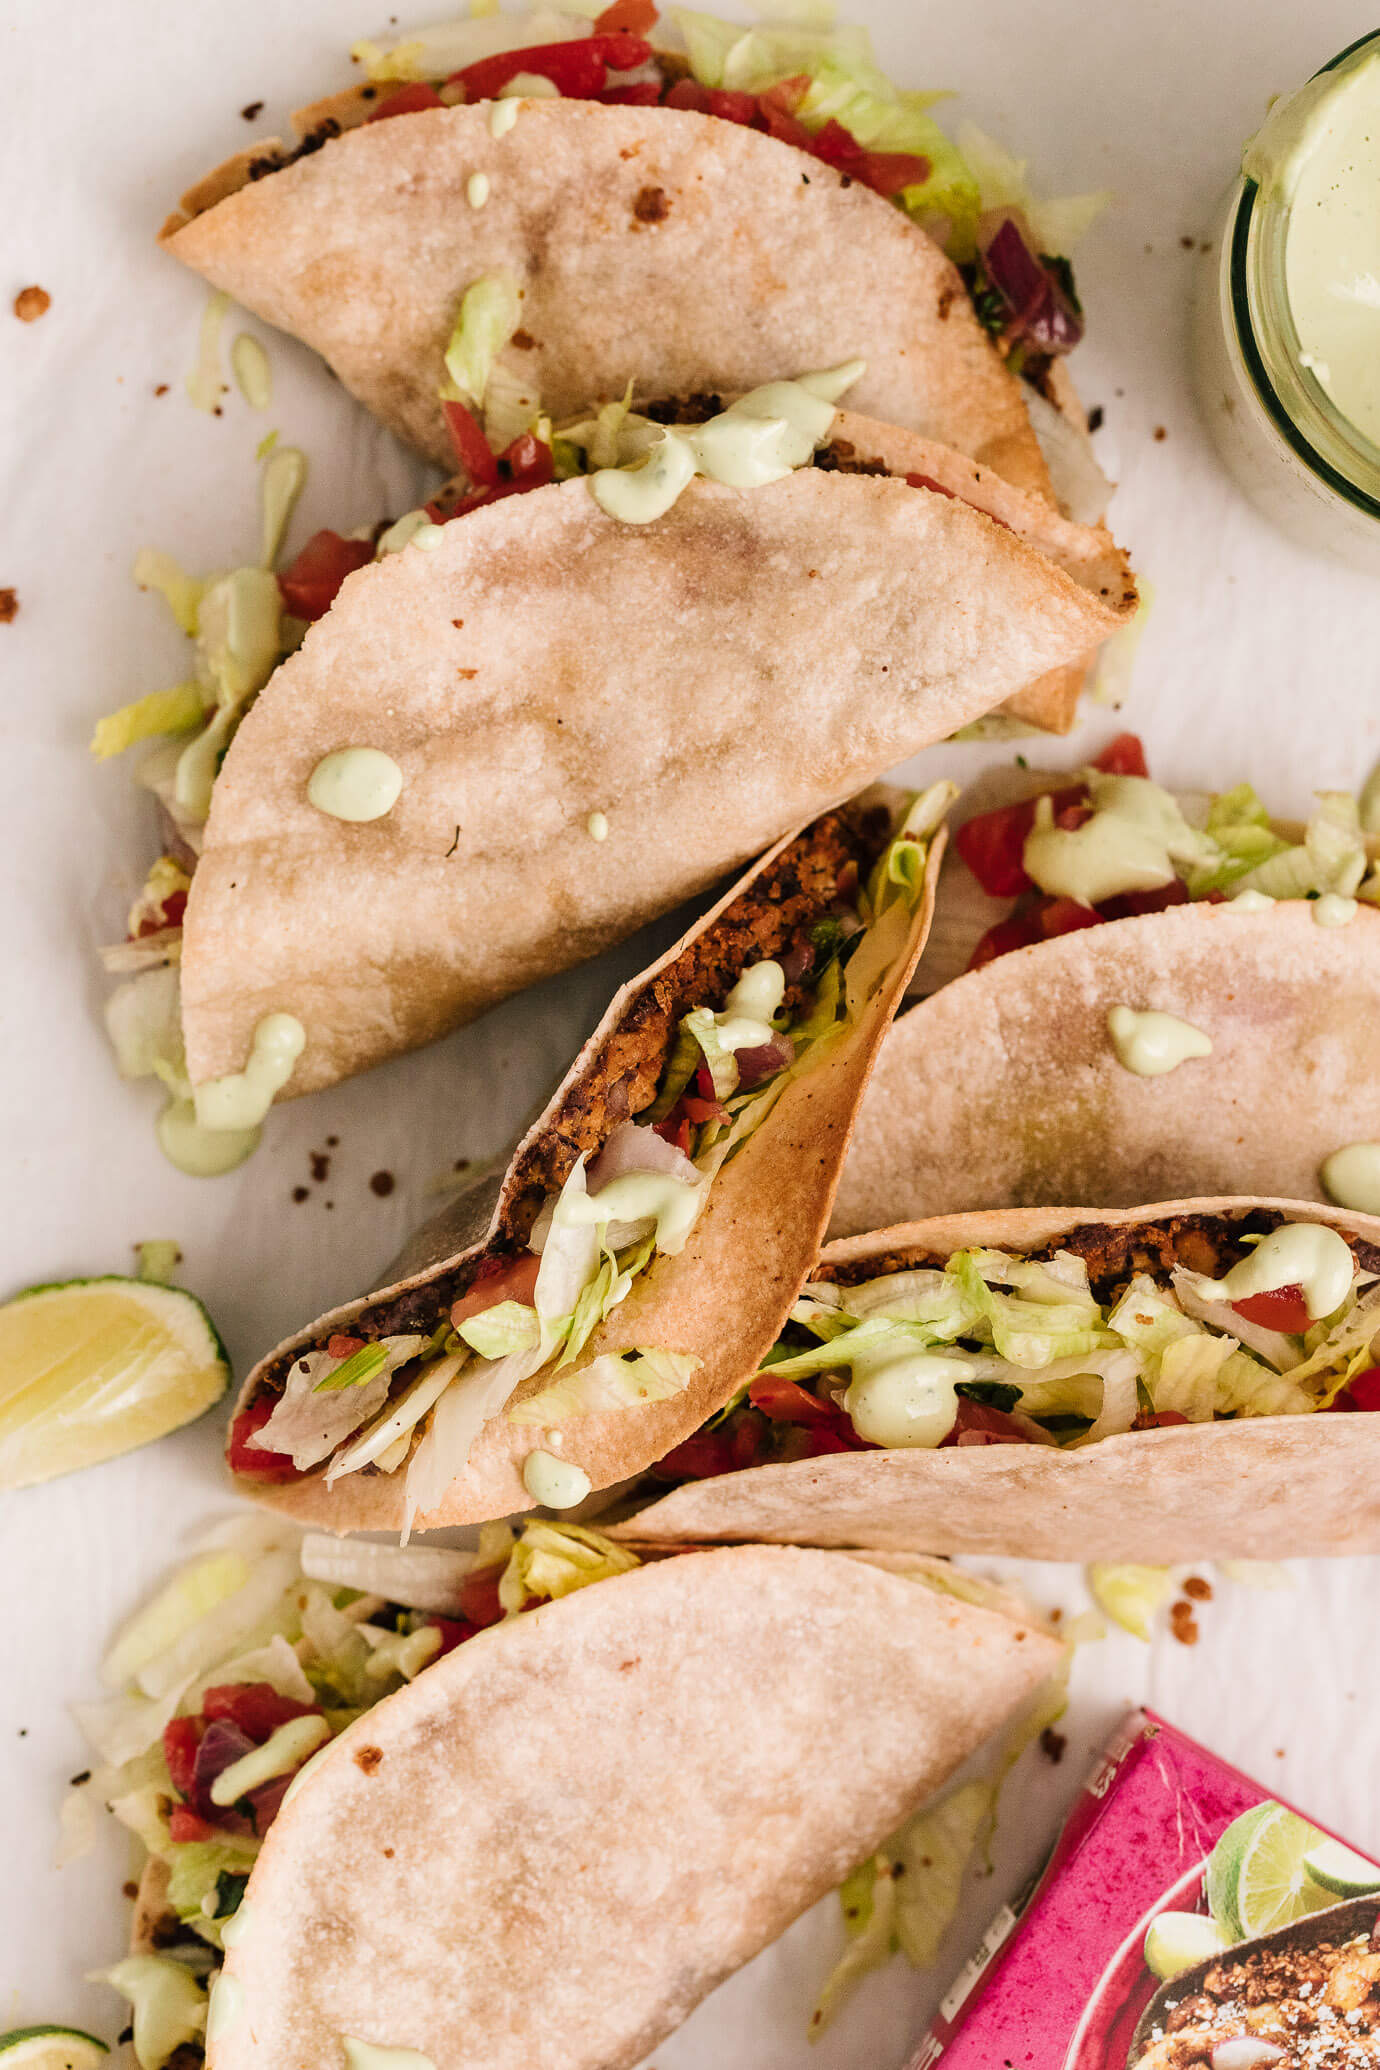 Vegan Crispy Baked Tacos with Mexican Tofu Crumbles